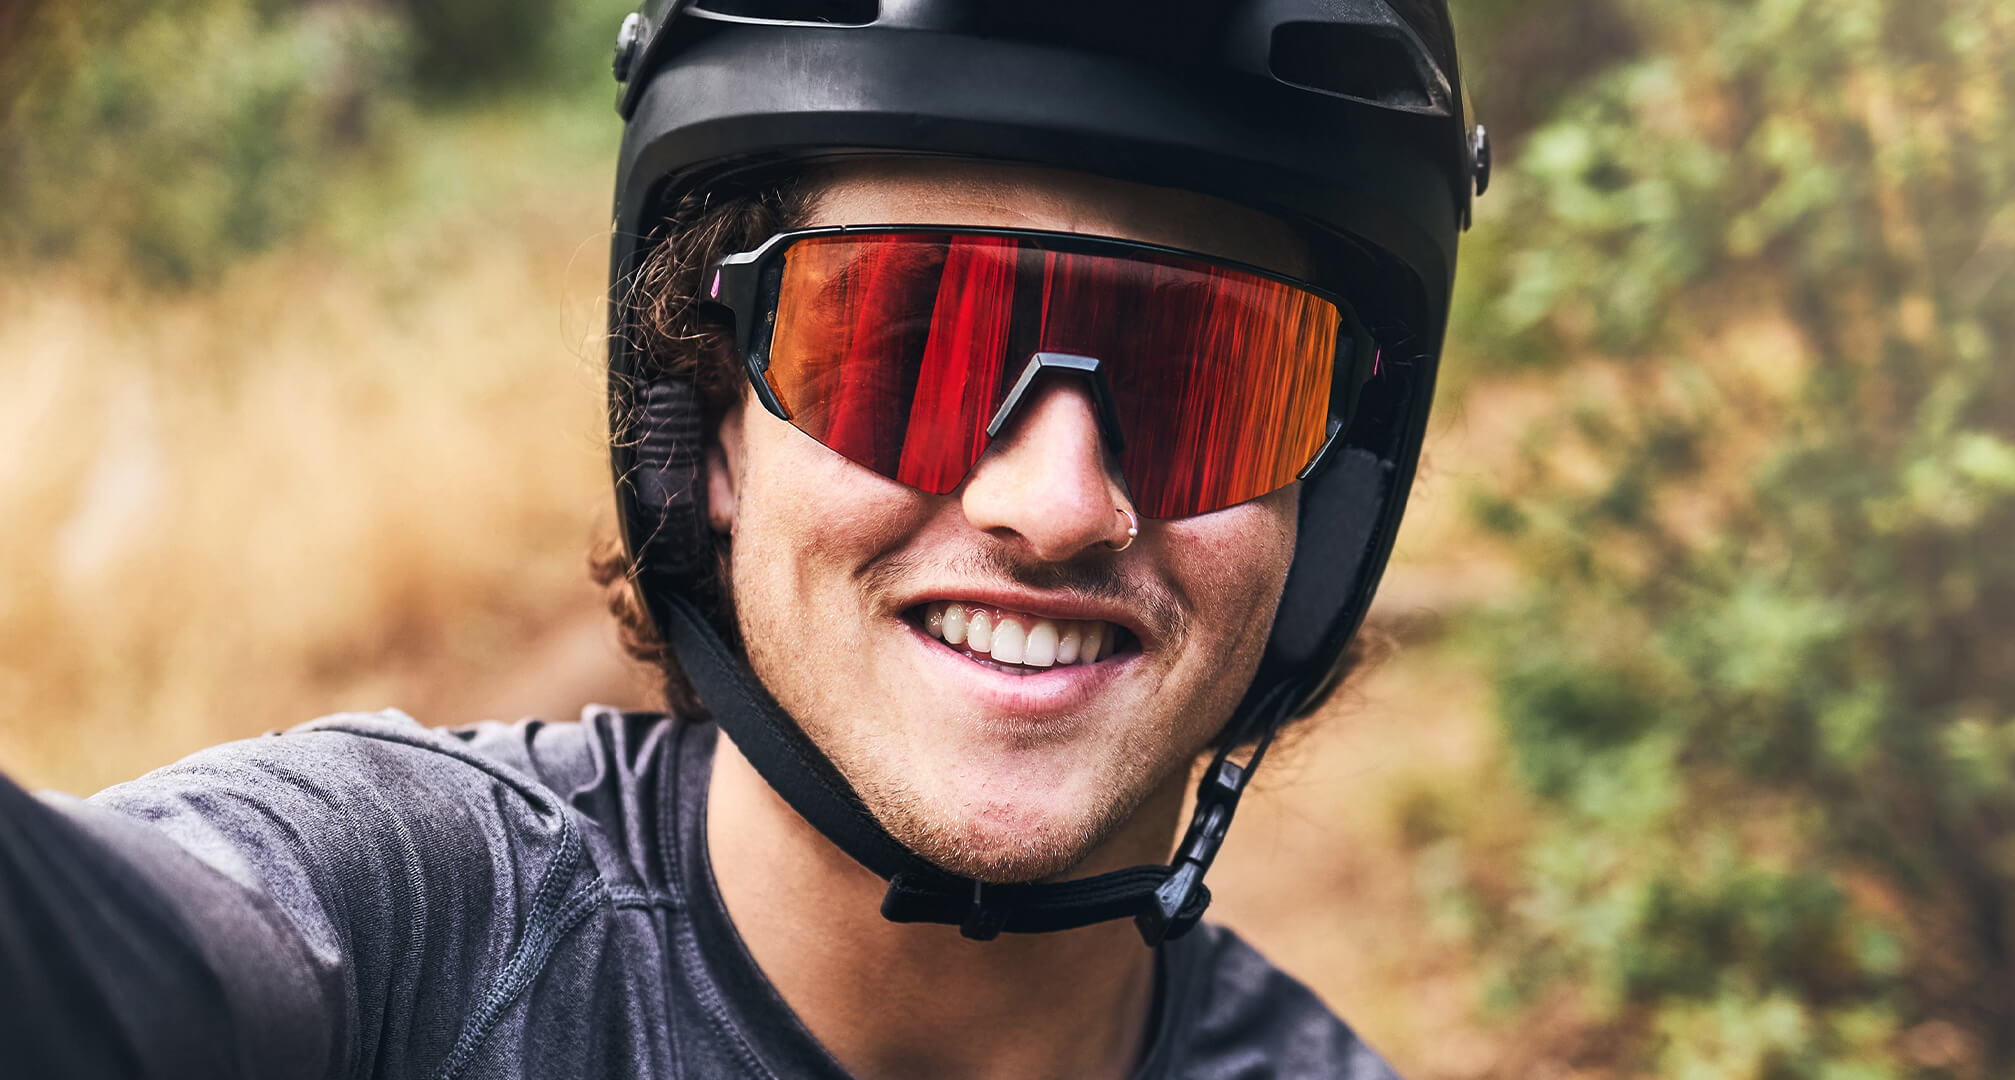 close up image of person wearing bike helmet and sunglasses